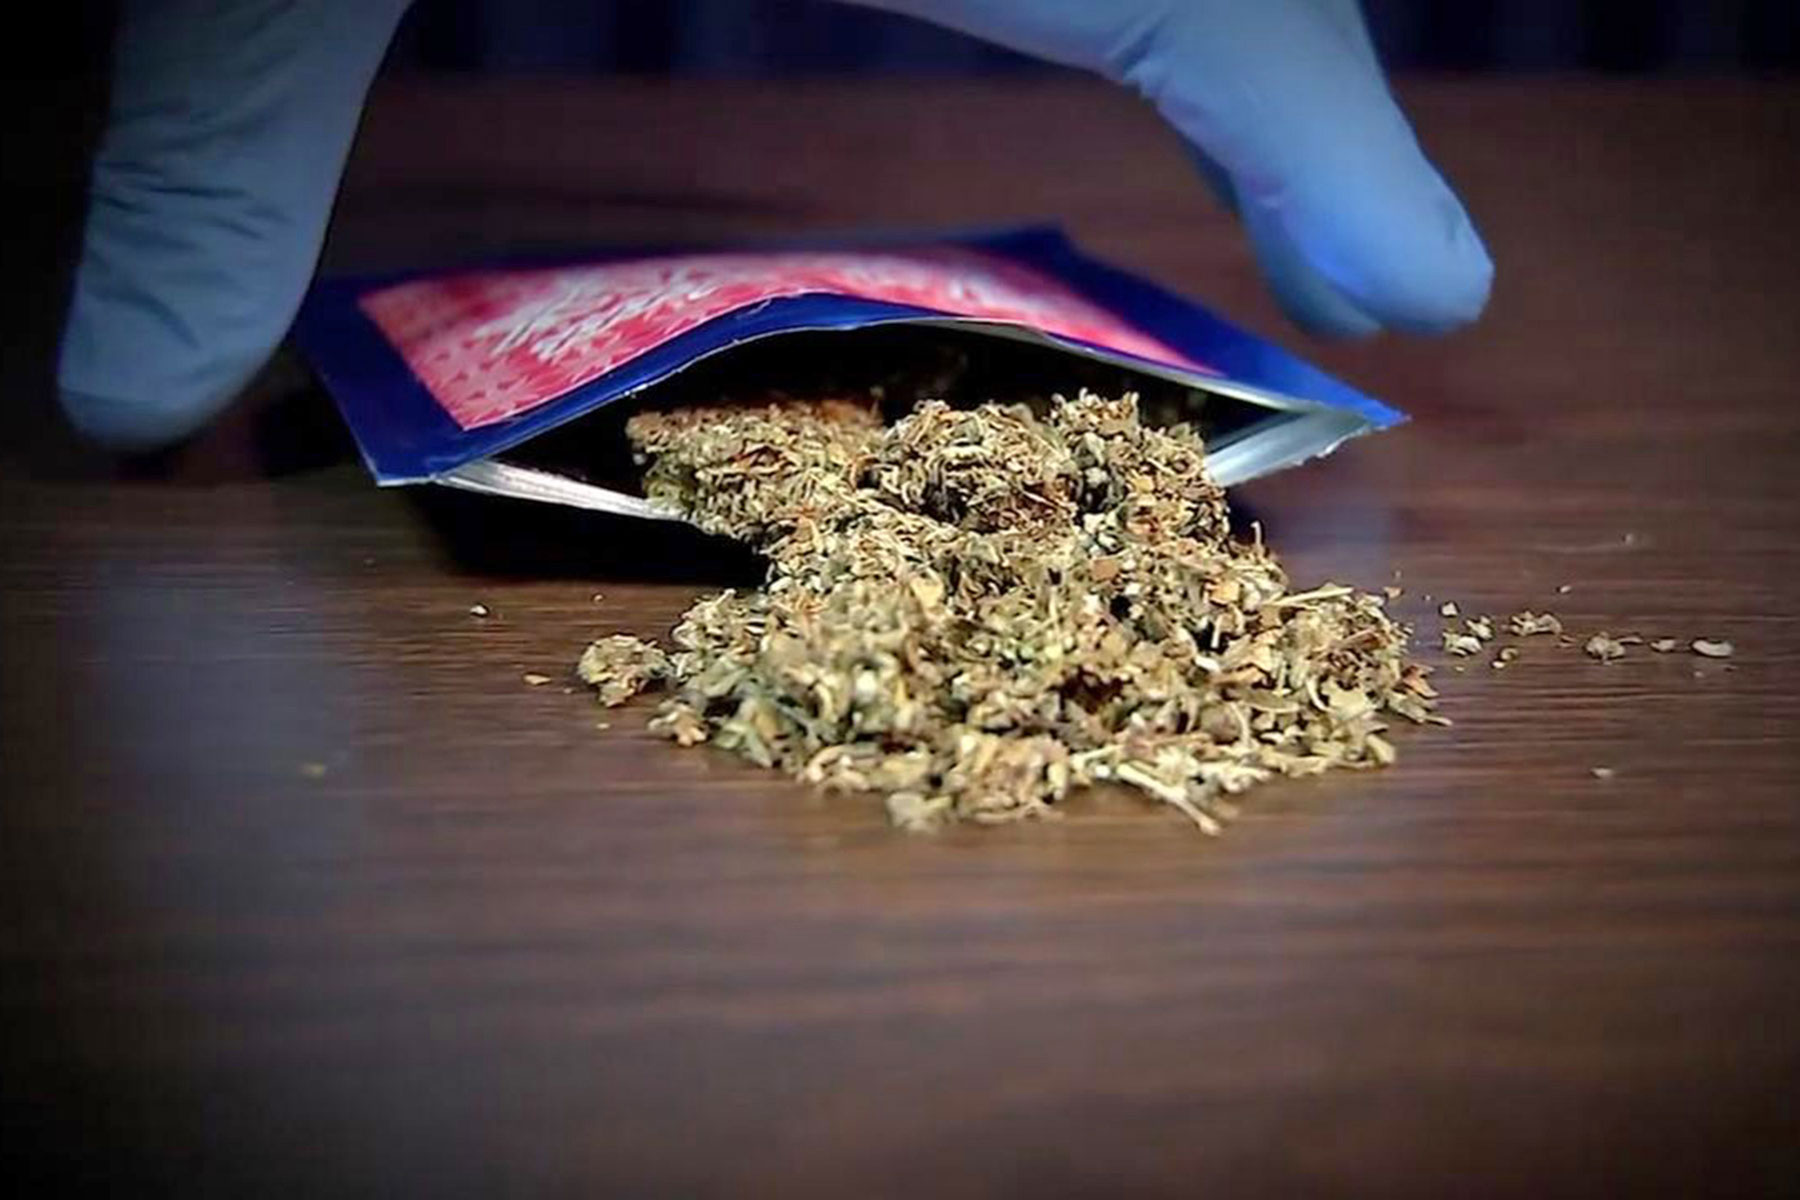 Fake weed' warning includes Outagamie County